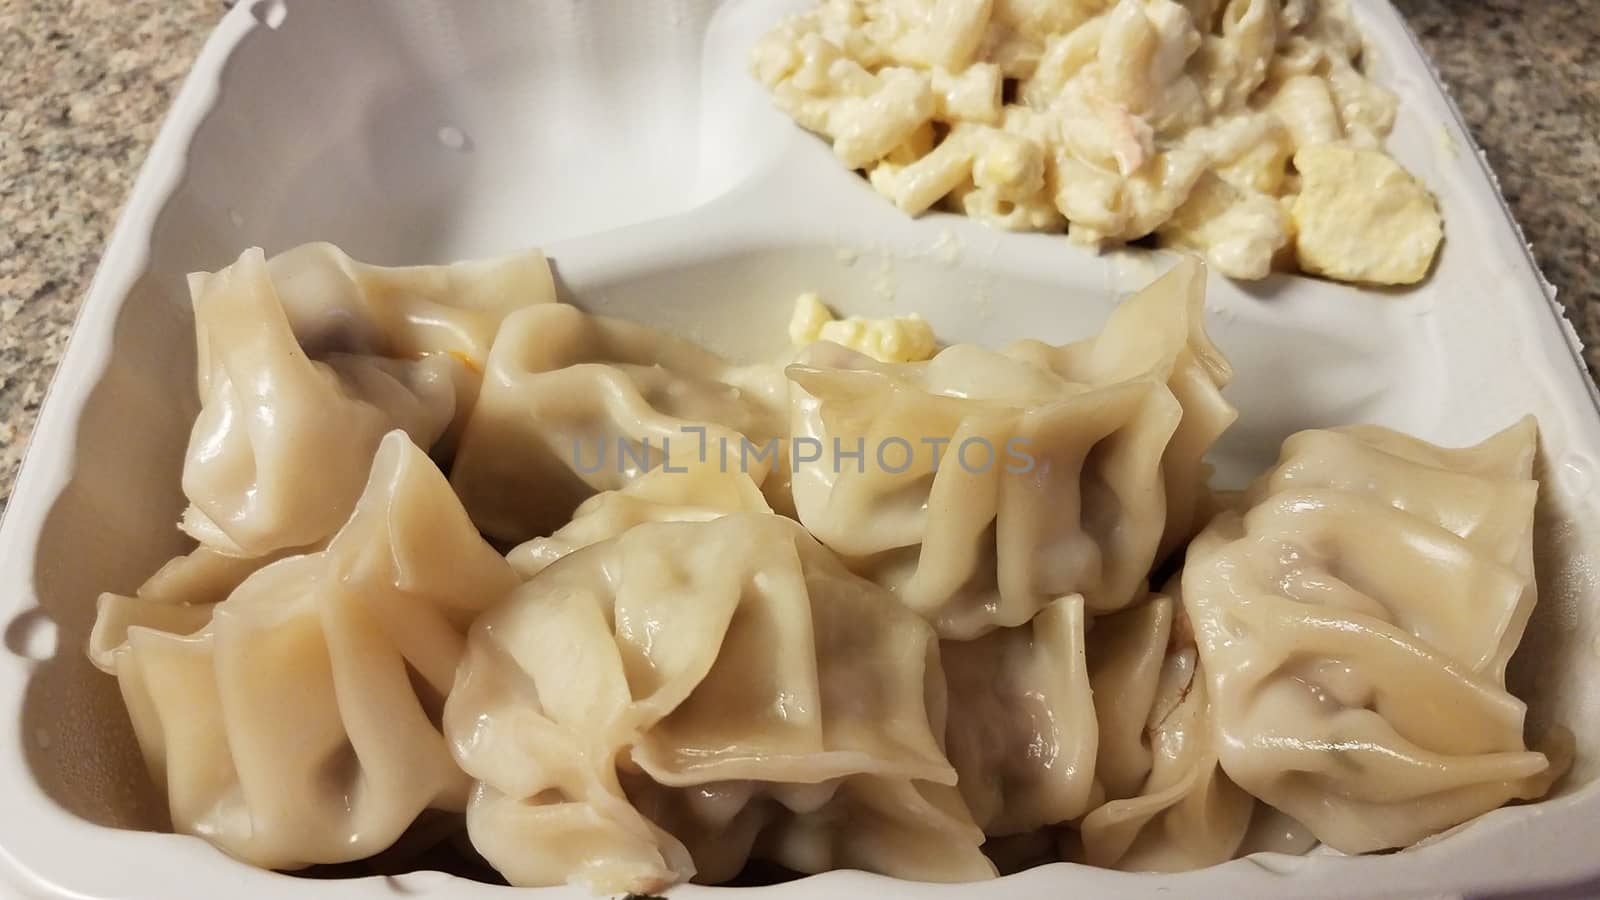 take out container of dumplings and macaroni salad on counter